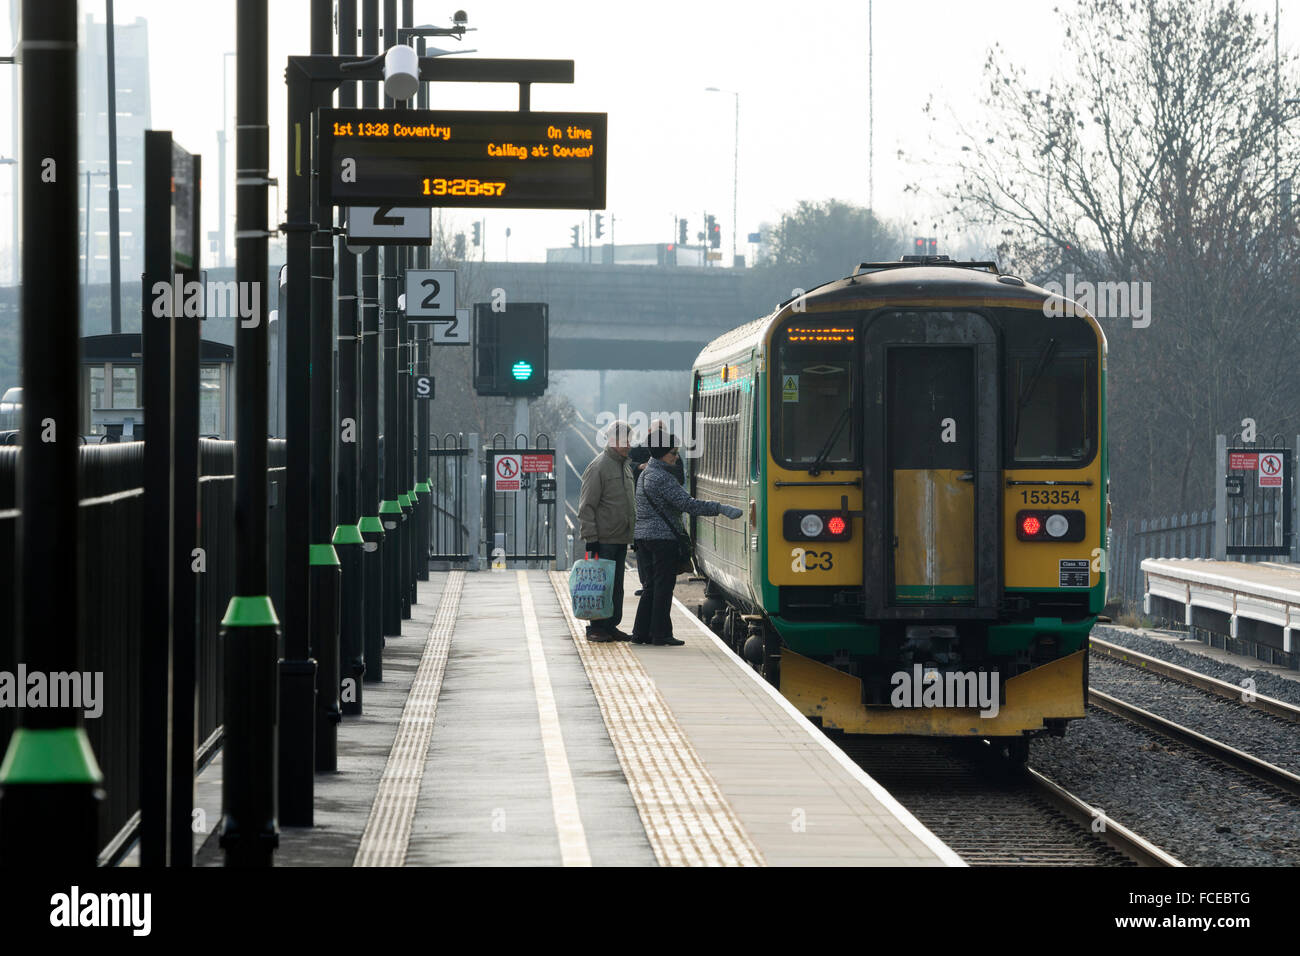 London Midland train at Coventry Arena station, Coventry, UK Stock Photo